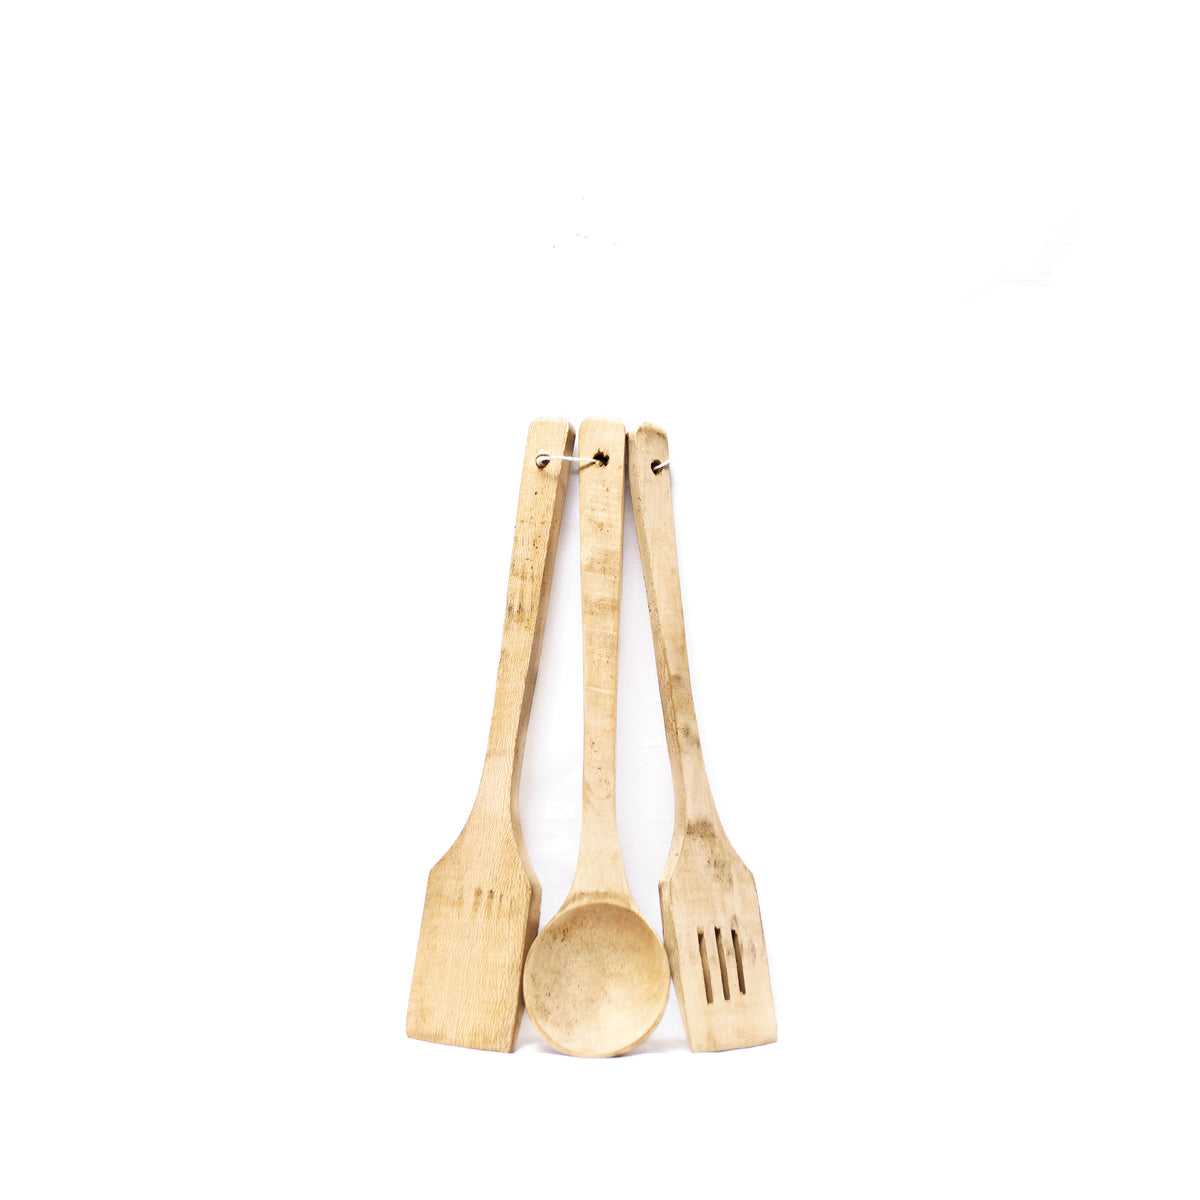 Set of 3 Wooden Kitchen Spoons: Craftsmanship Meets Functionality